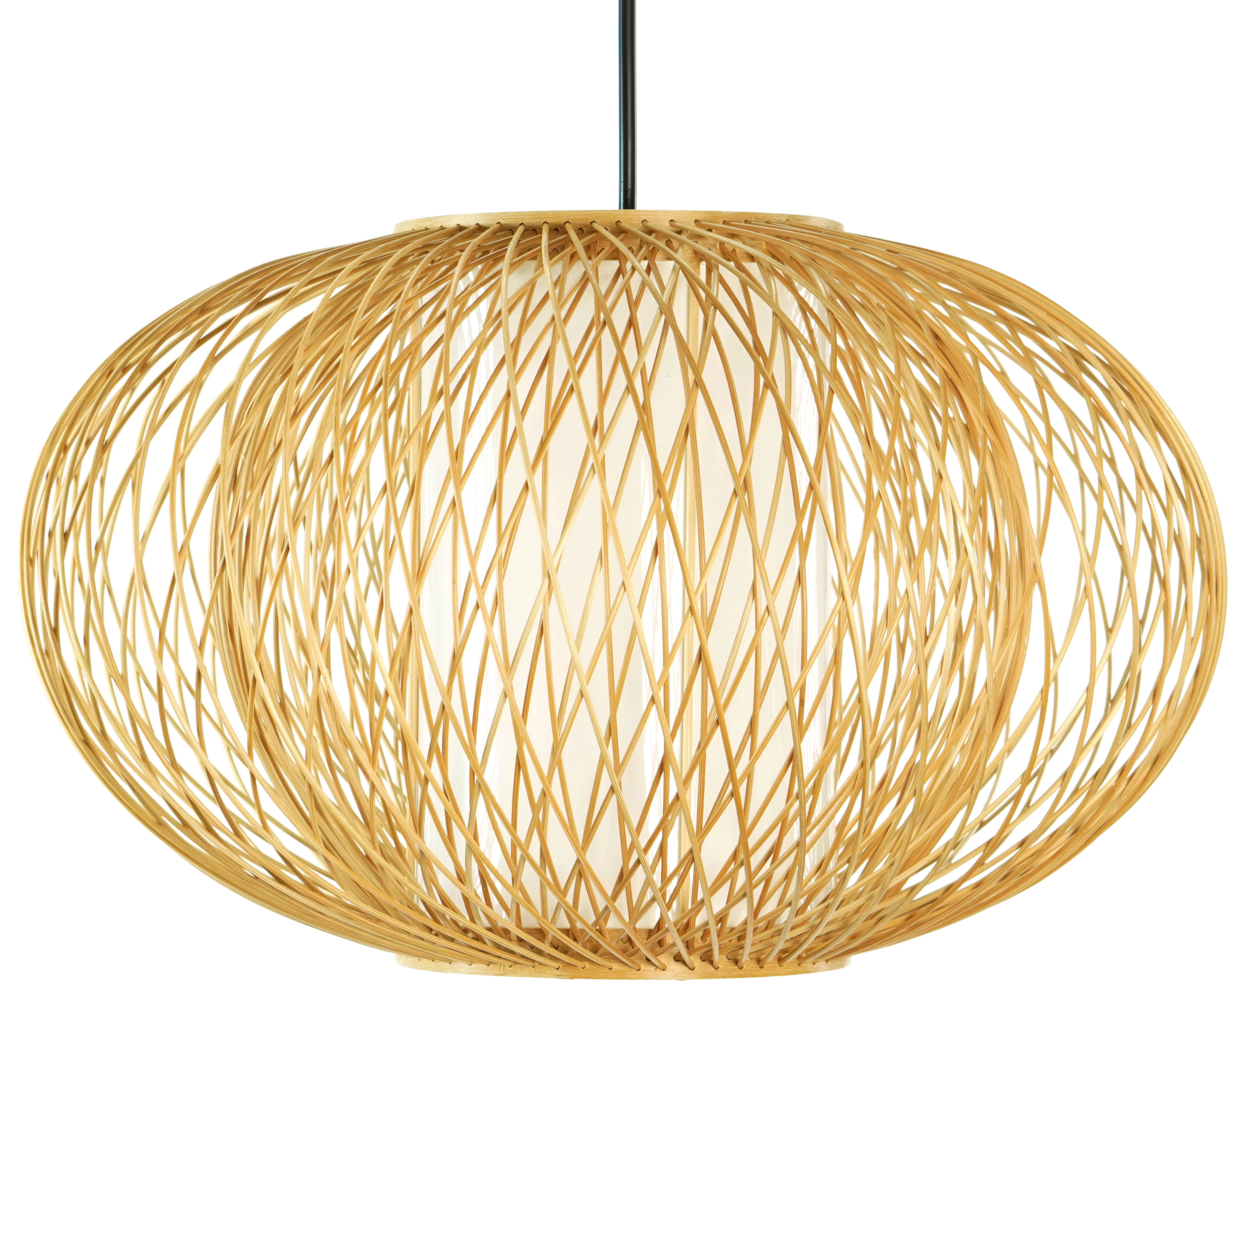 Modern Bamboo Wicker Rattan Hanging Light Shade For Living Room, Dining Room, Entryway - Small